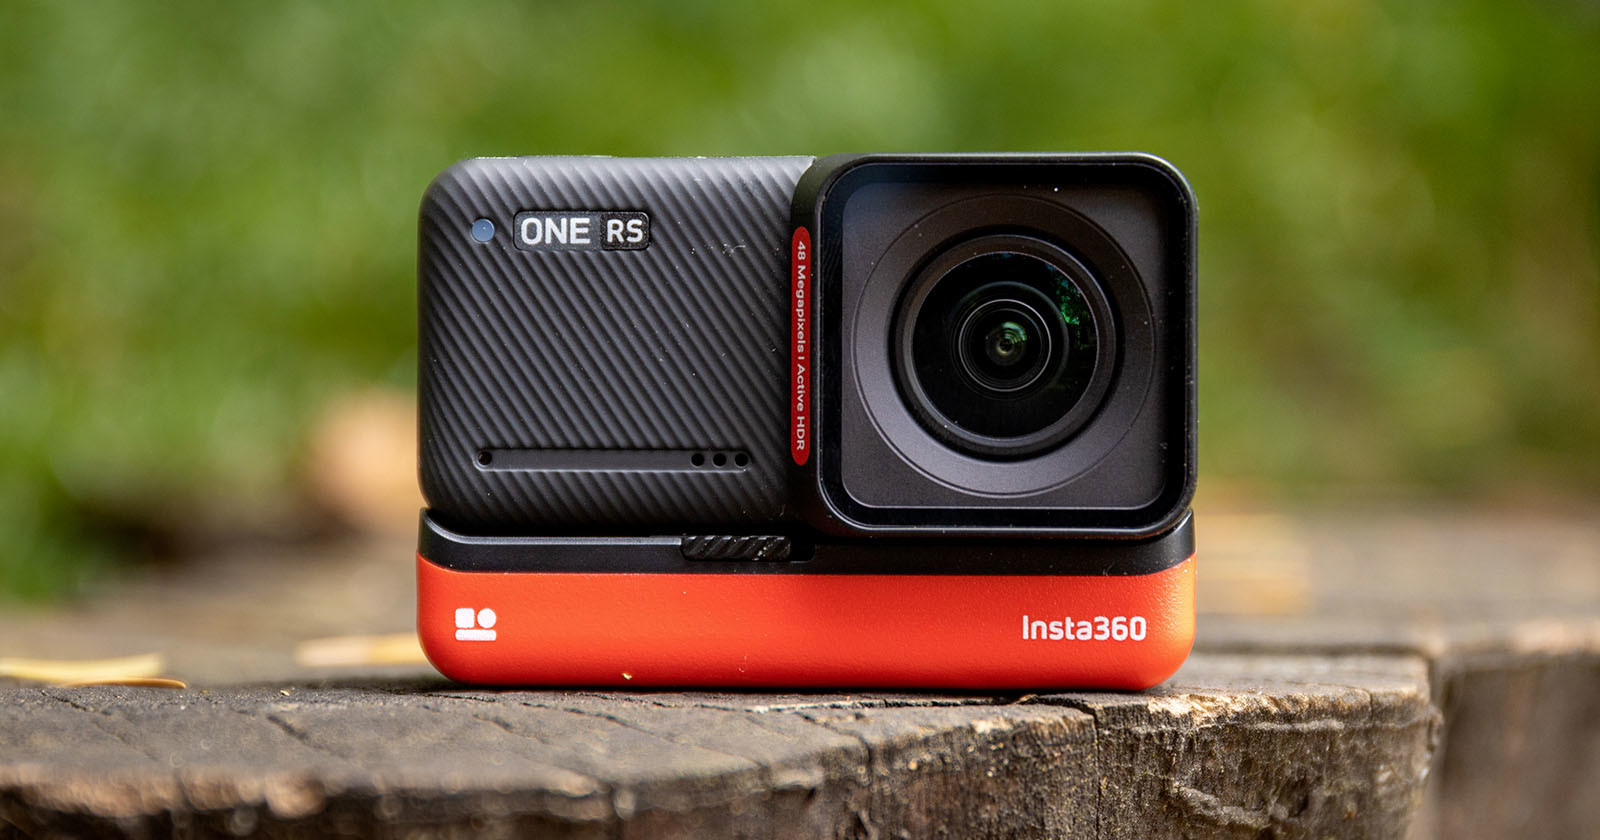  vulnerability insta360 cameras lets anyone download your photos 